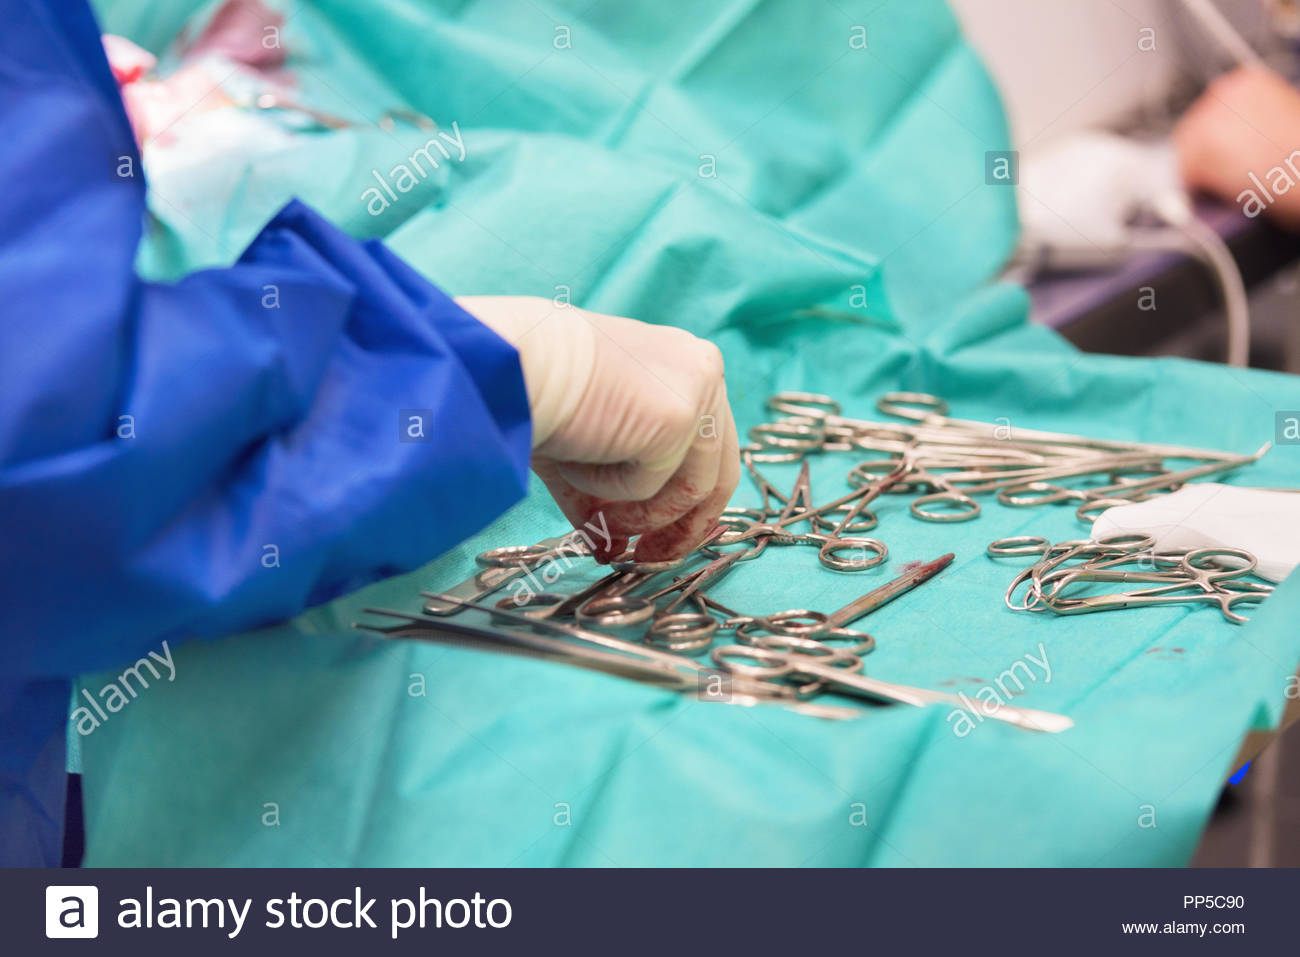 Medical Background Surgery Instruments In Operating Room Stock